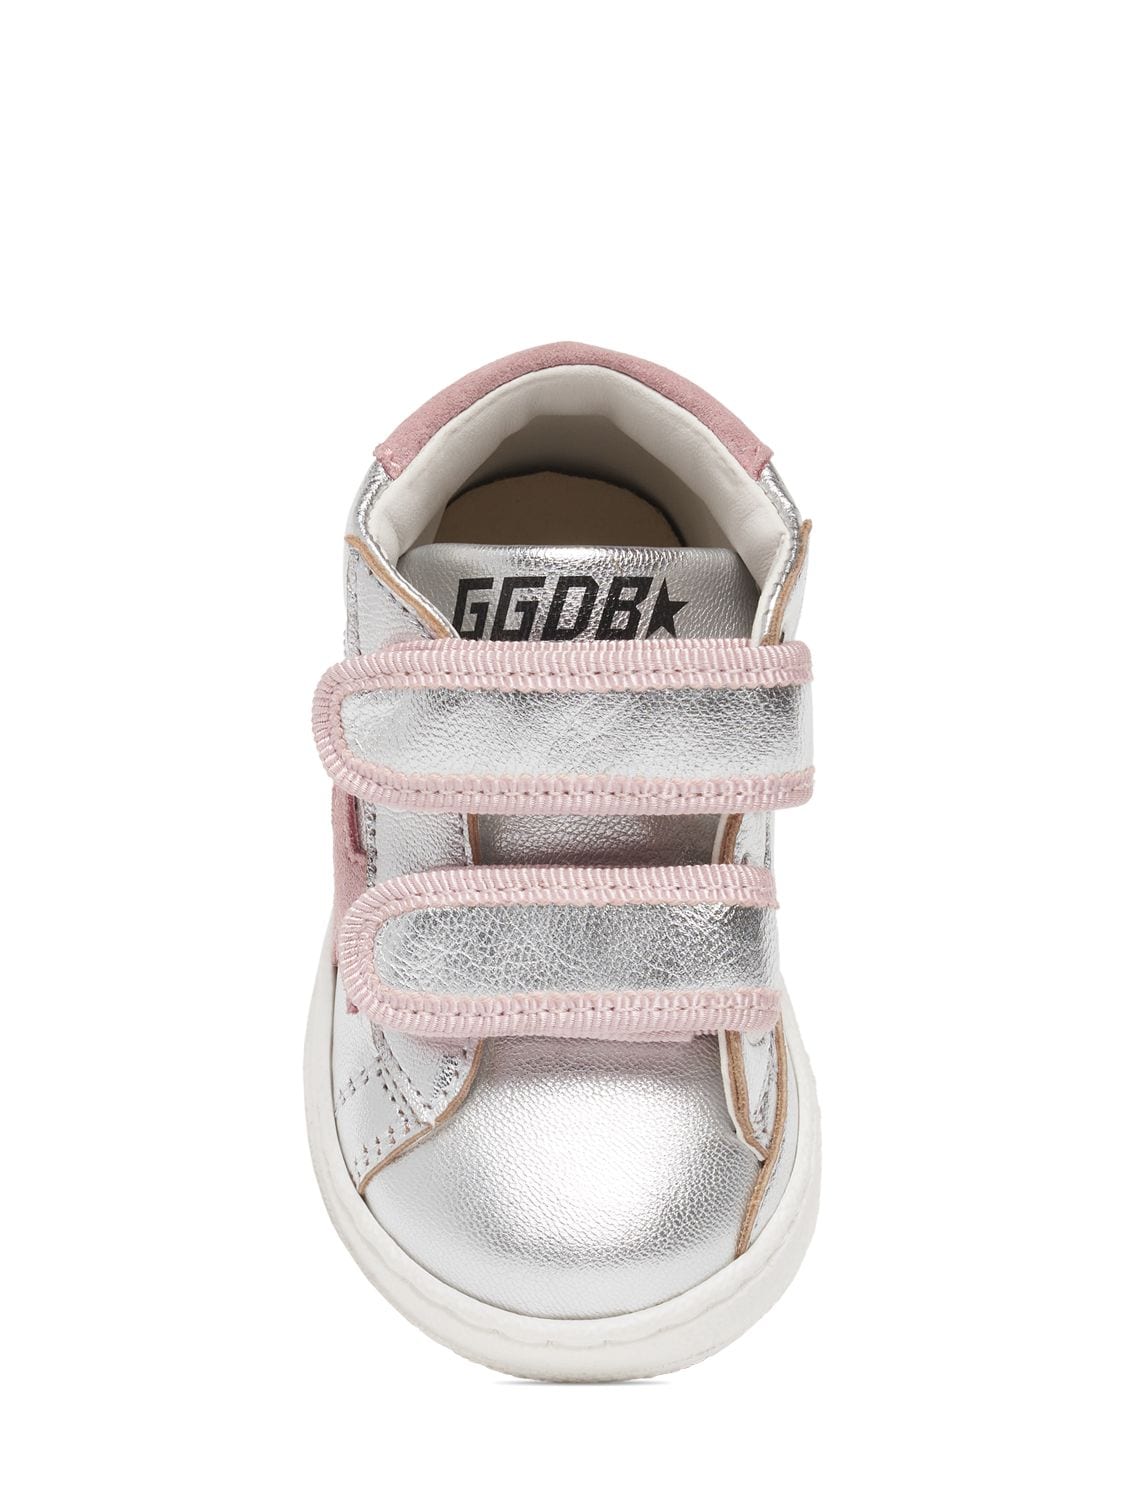 Shop Golden Goose June Laminated Strap Sneakers In Silver,pink